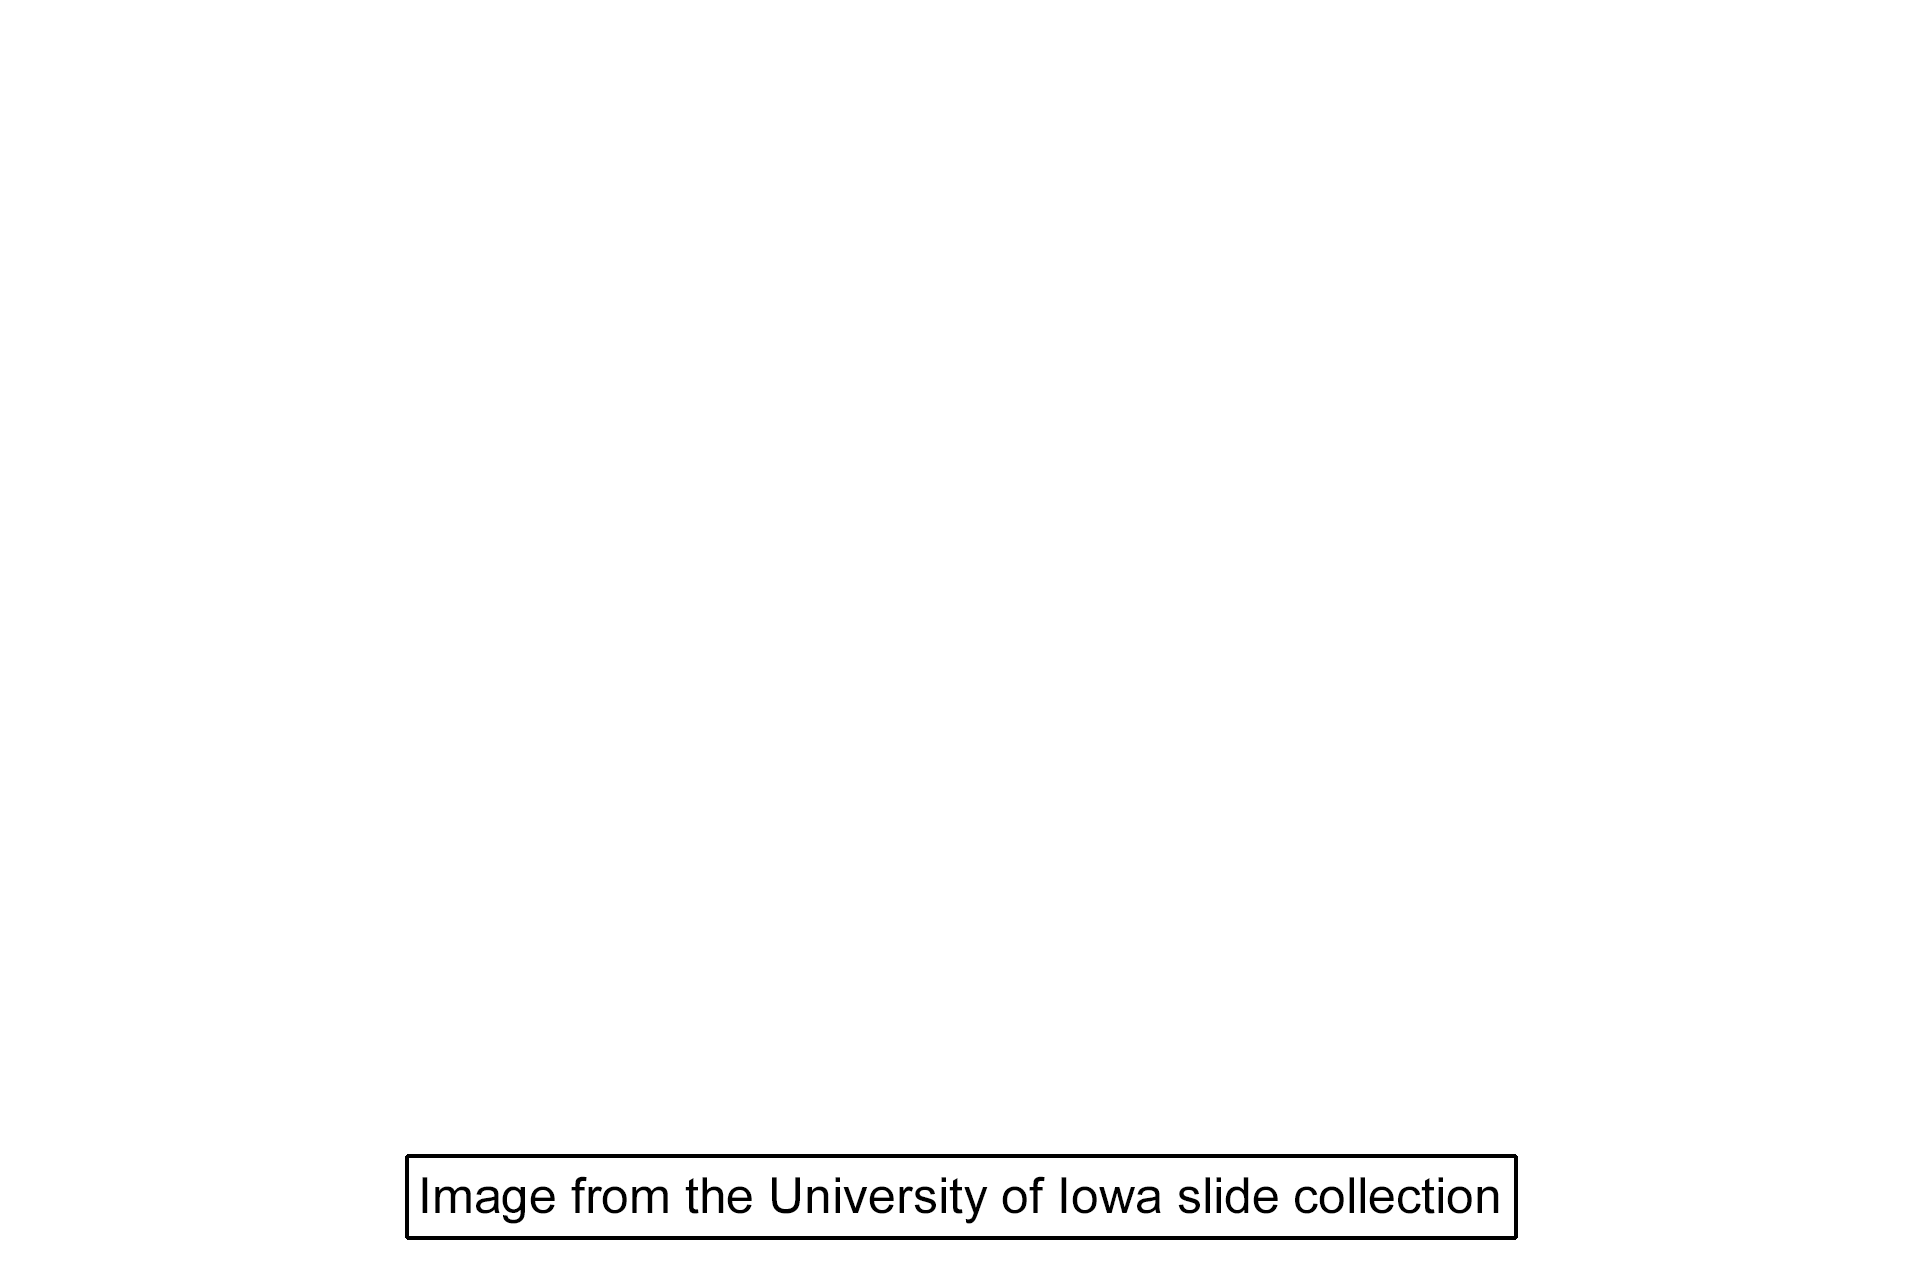 Image source > <p>The image was taken of slide in the University of Iowa collection</p>
